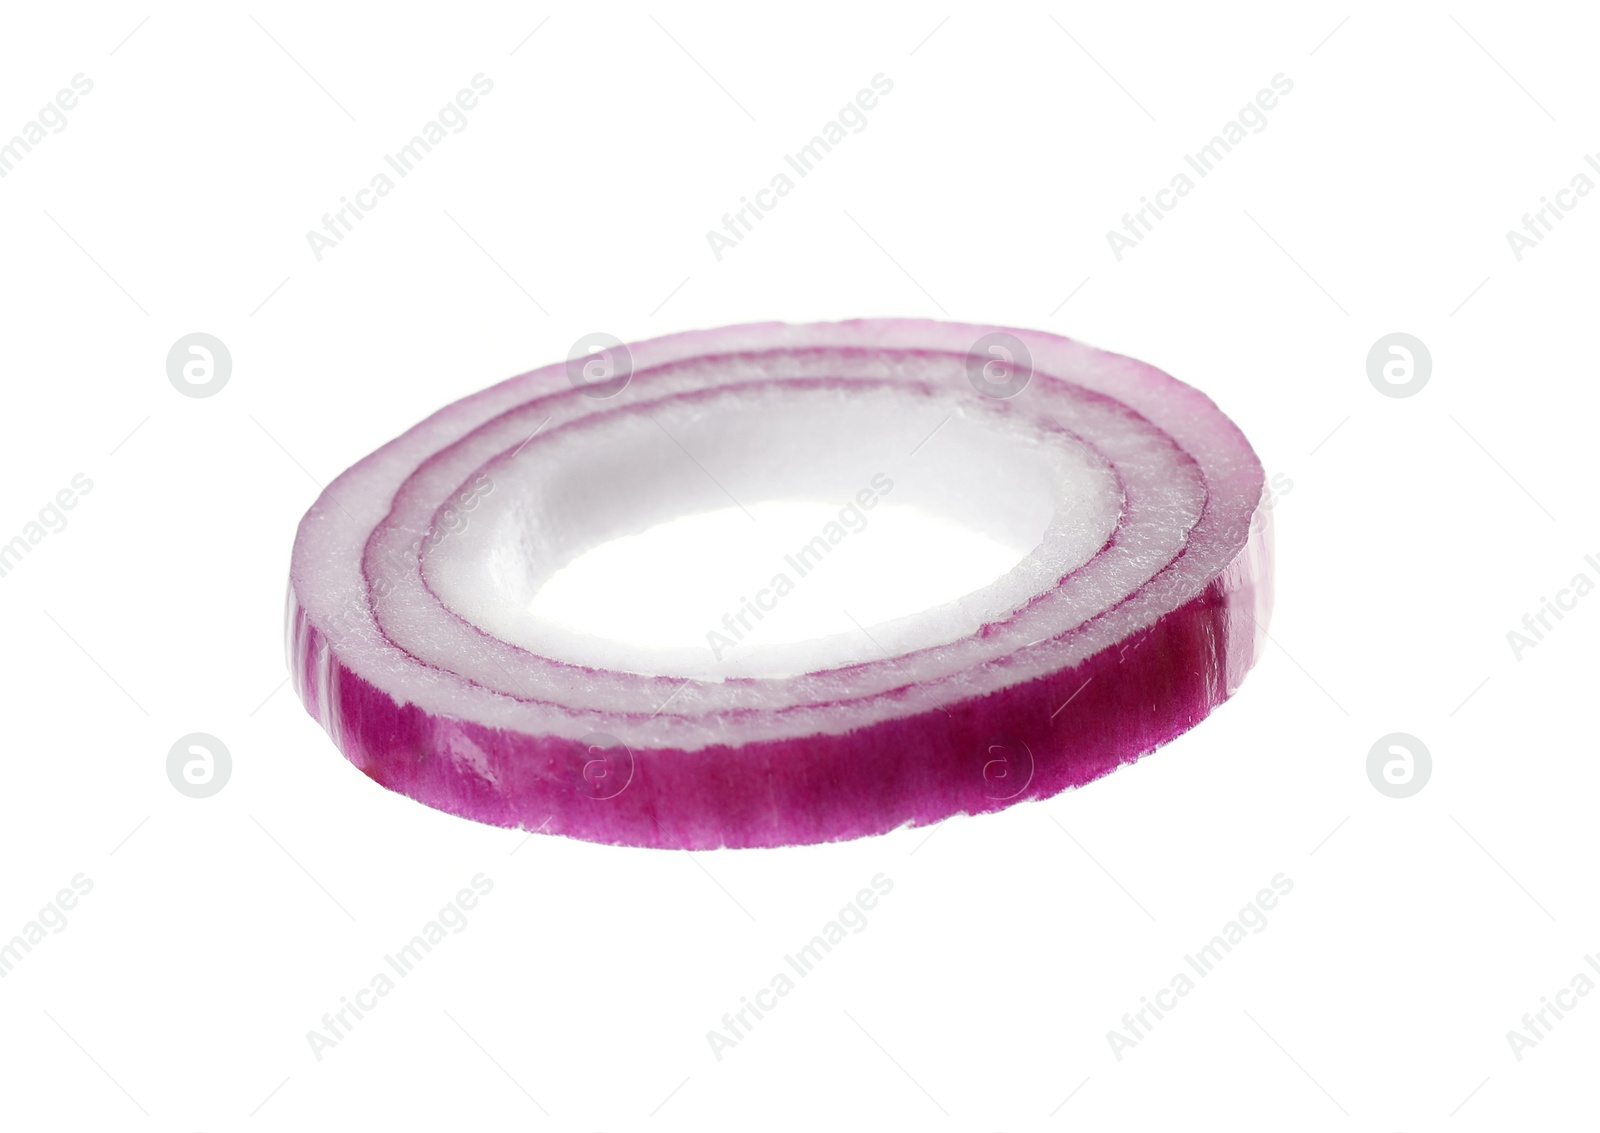 Photo of Cut red onion isolated on white. Ingredient for sandwich